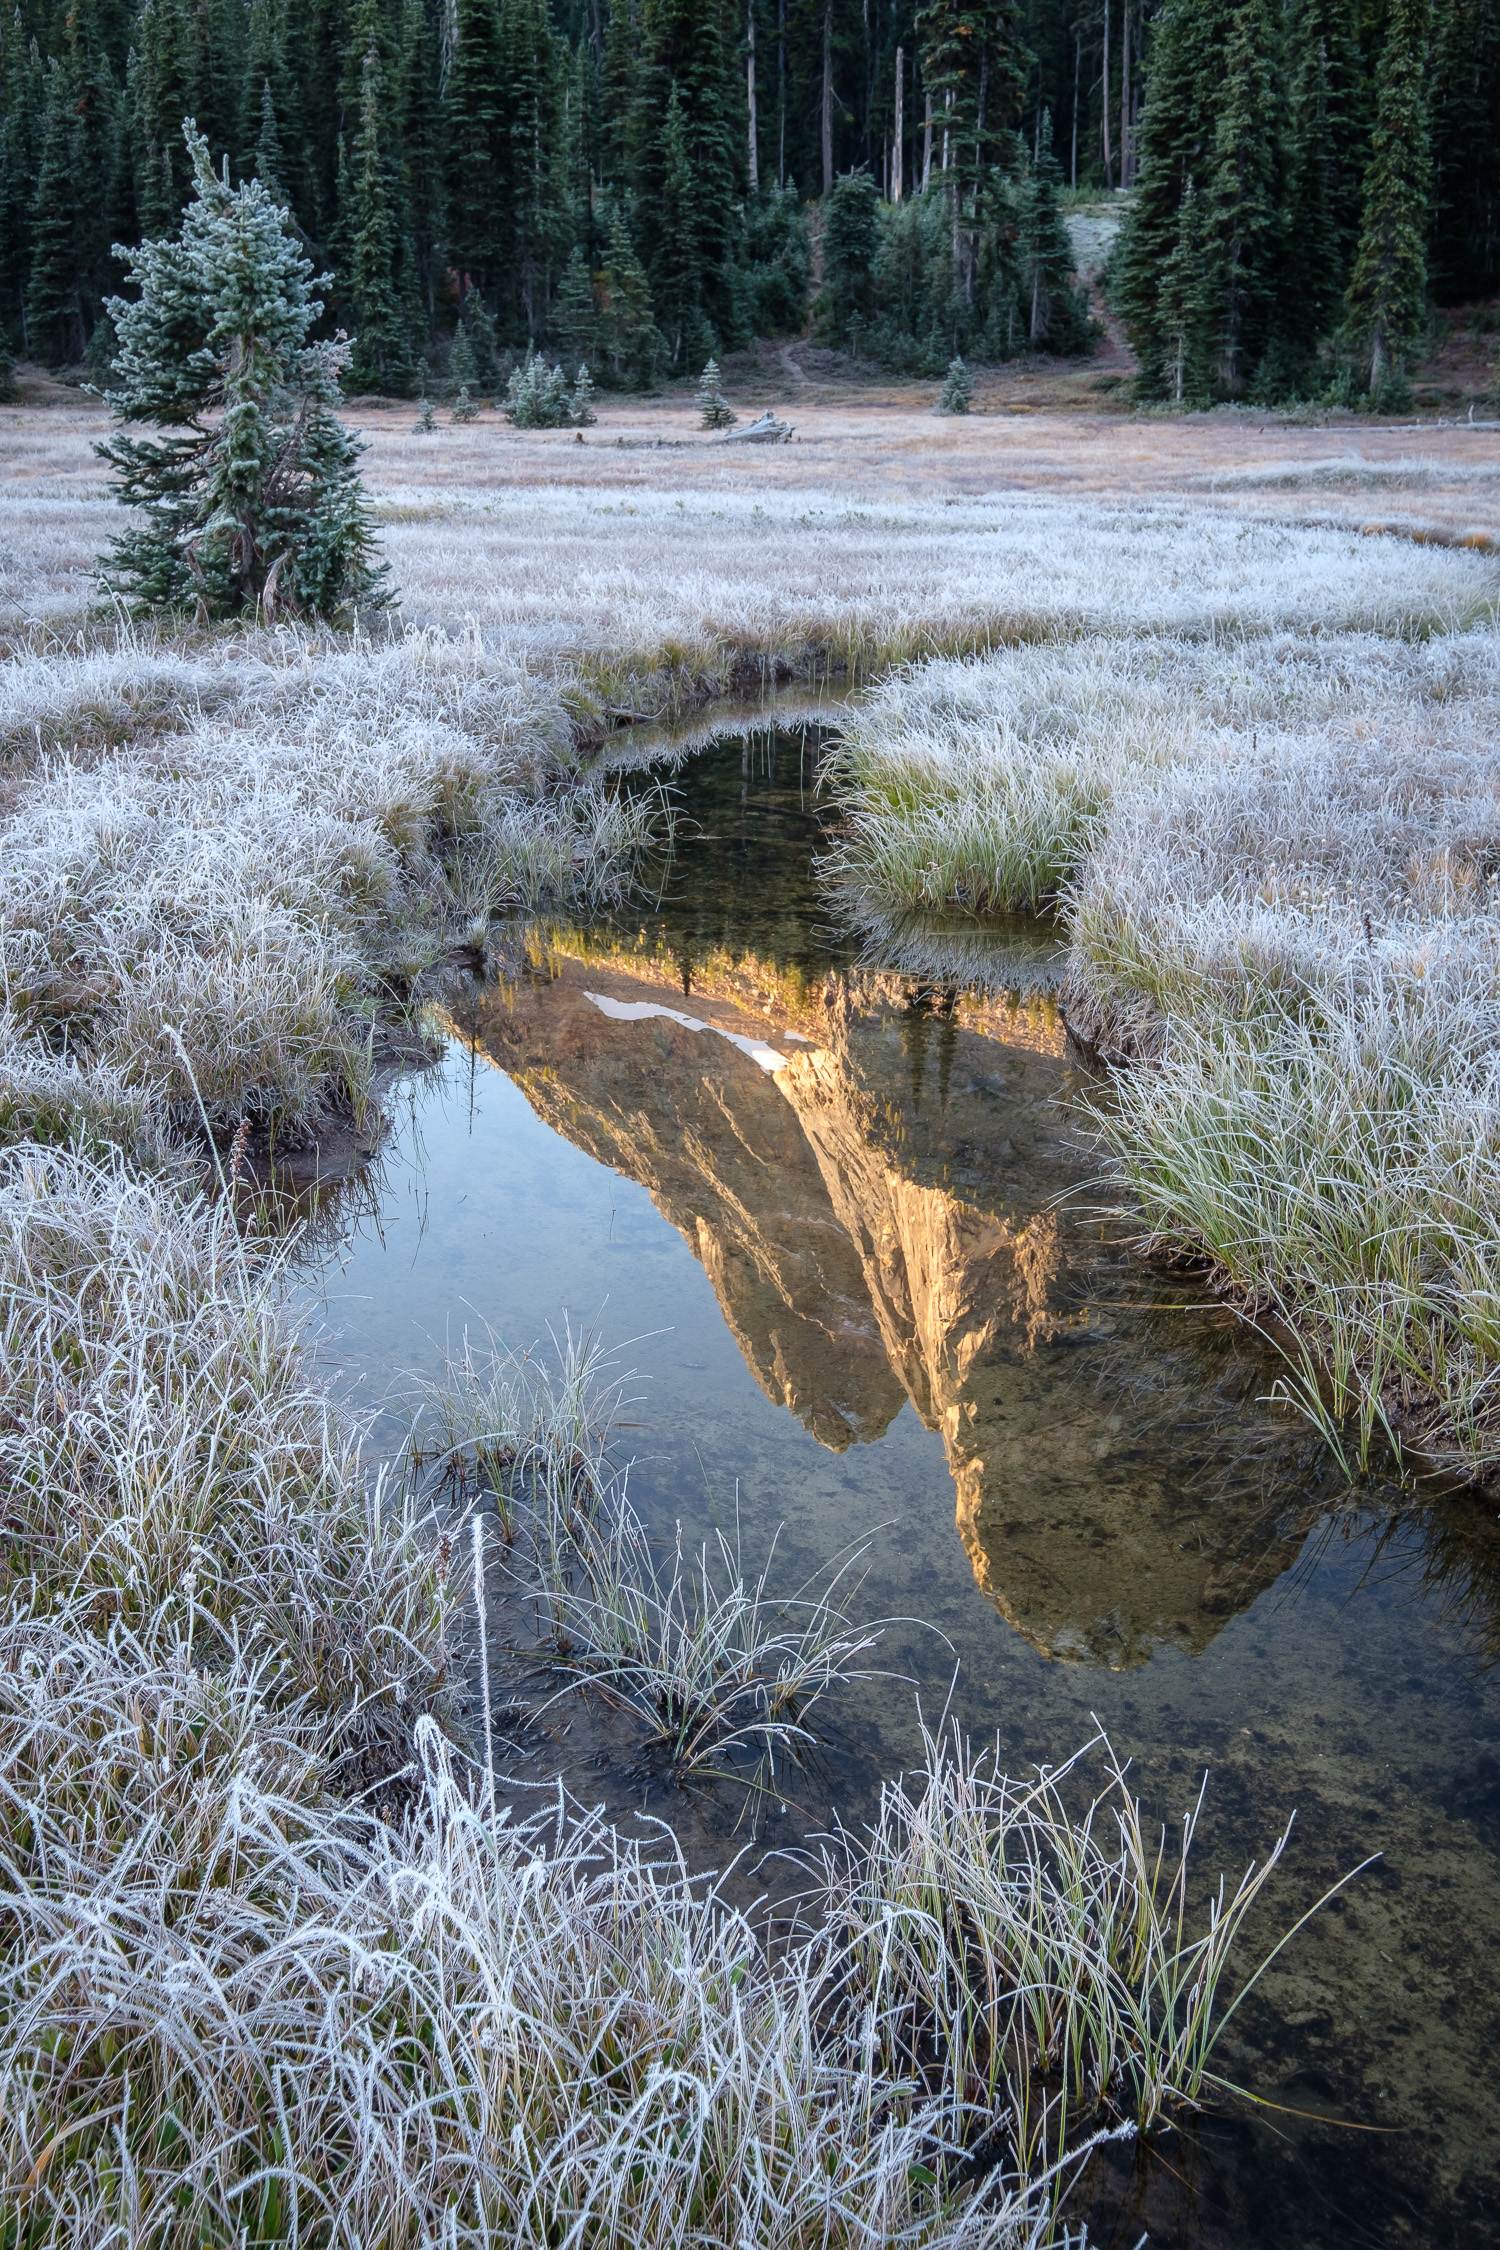  Liberty Bell reflected in the headwaters of a creek on a chilly morning 